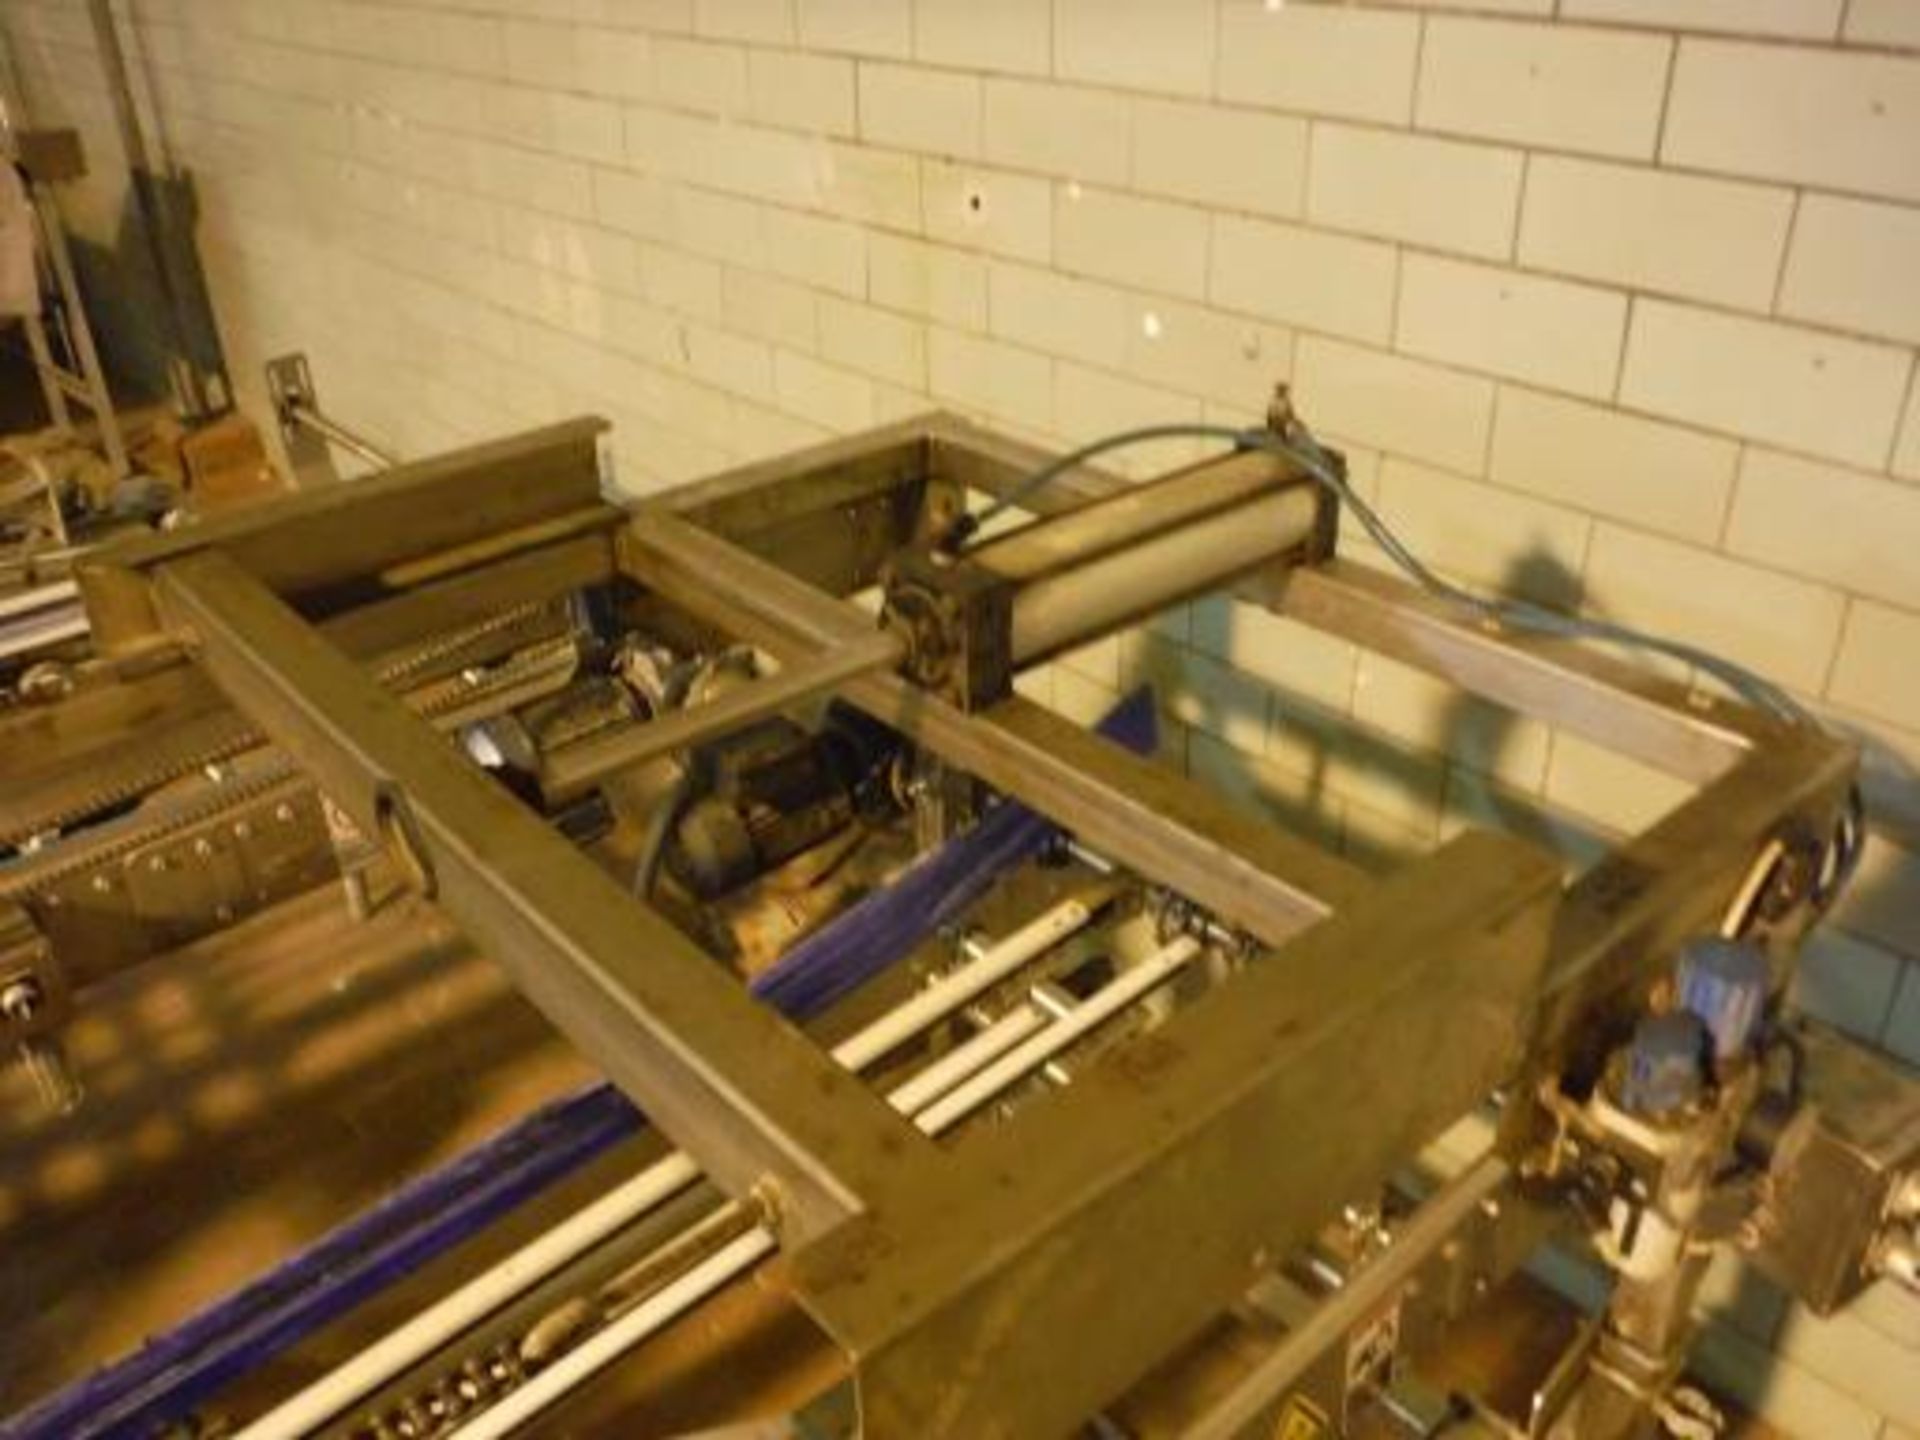 Lot of 5 conveyors approximately 90 in. long x 26 in. wide x 32 in. tall each, SS frames, with - Image 12 of 14